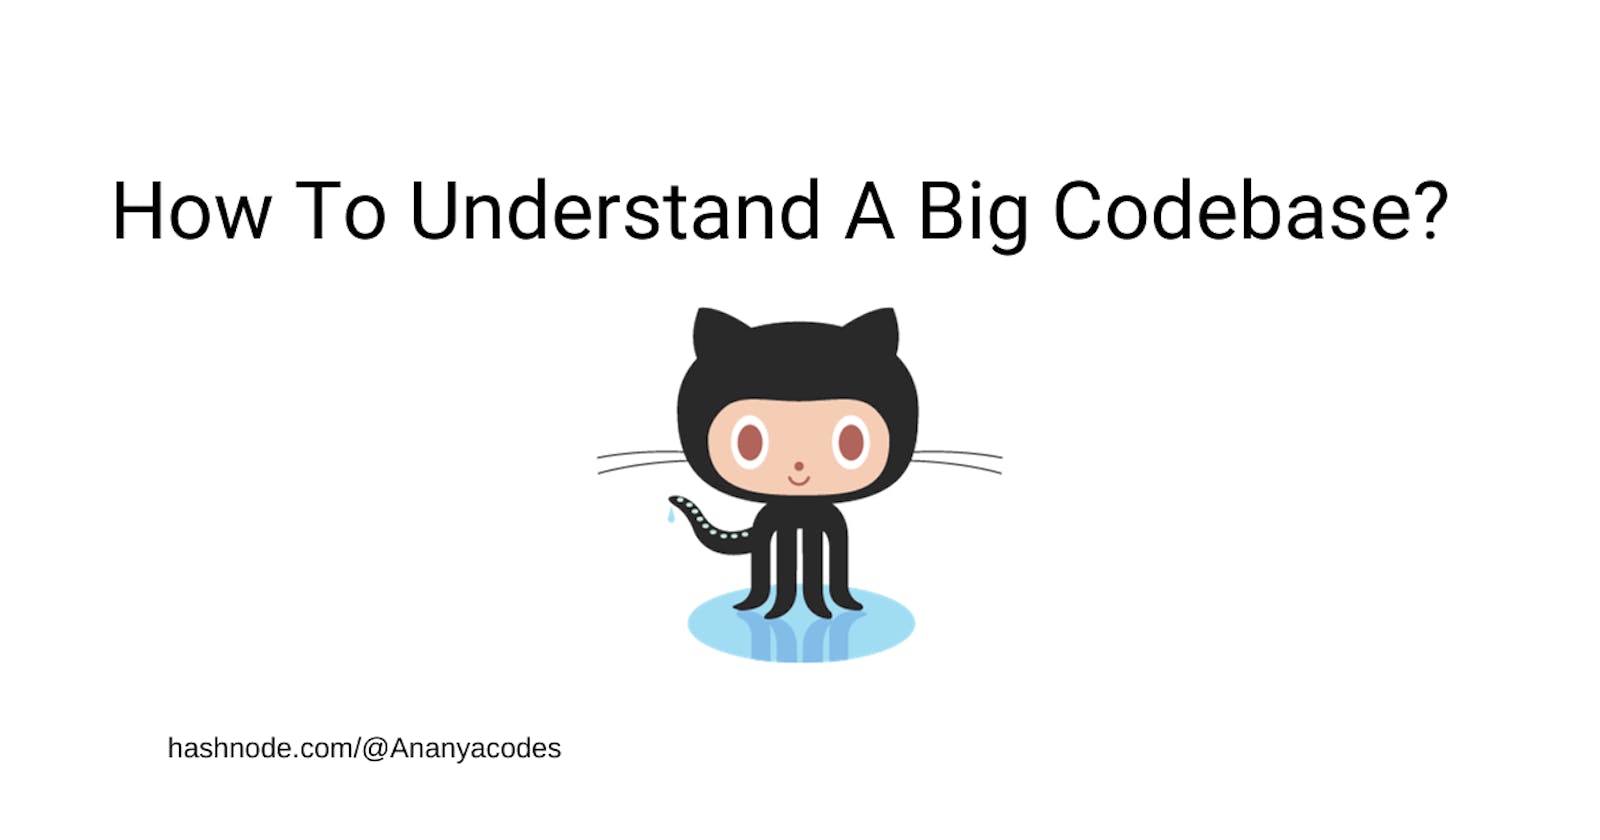 How To Understand A Big Codebase?